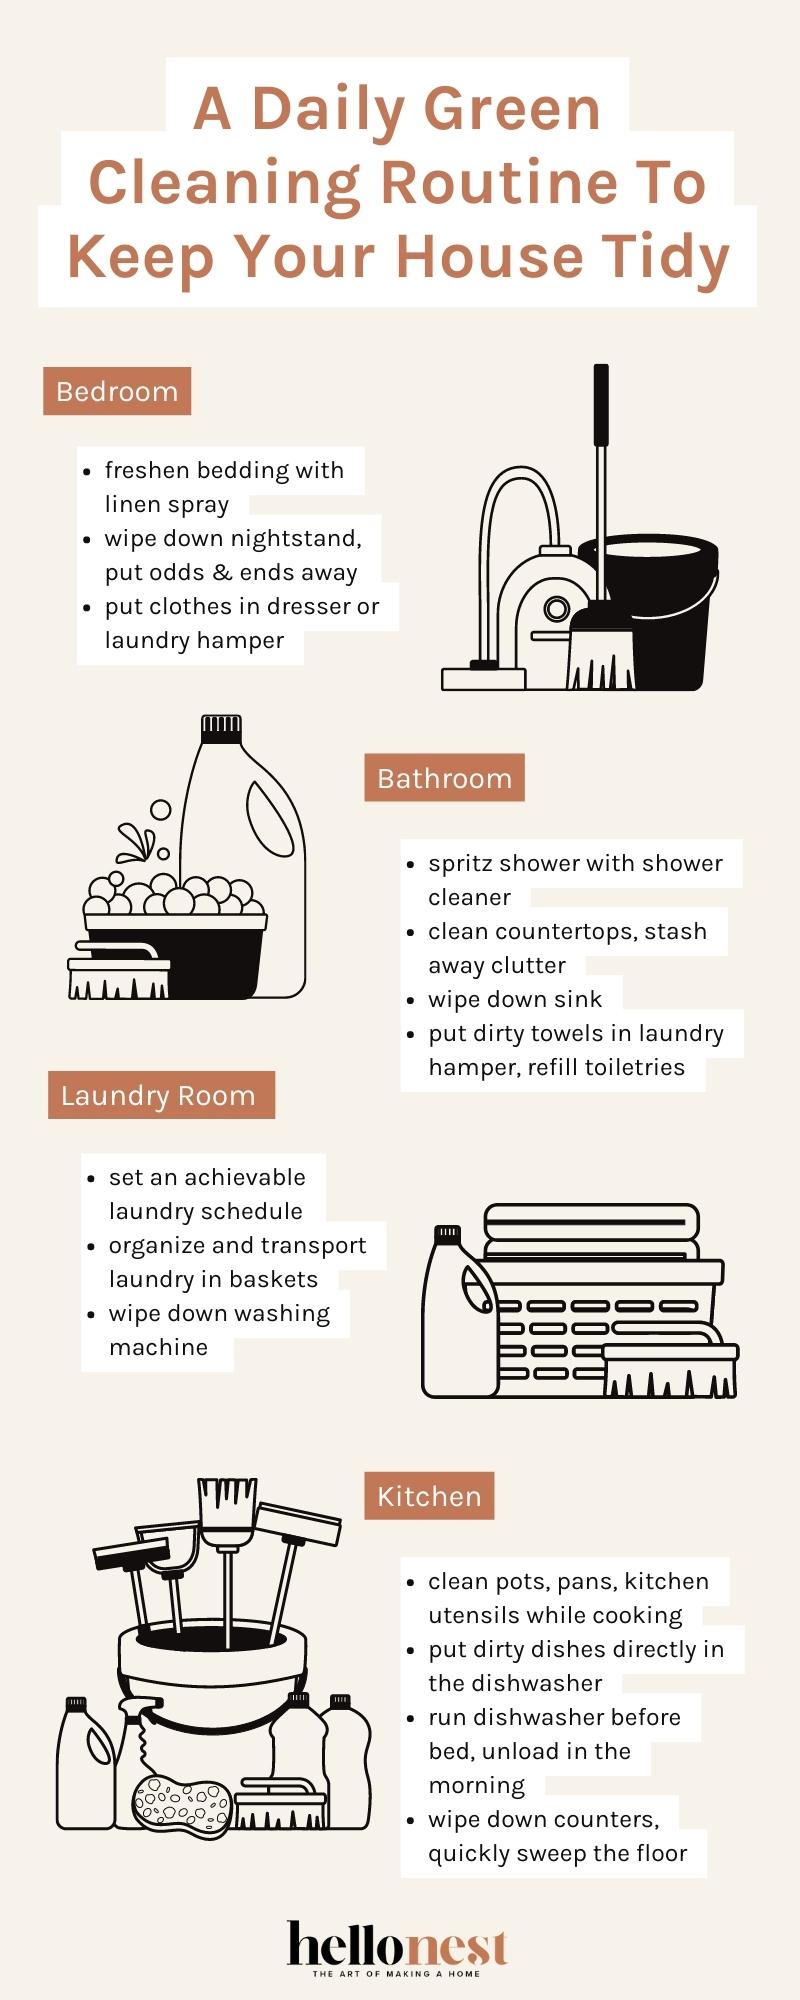 A Green Daily Cleaning Routine To Keep Your House Tidy